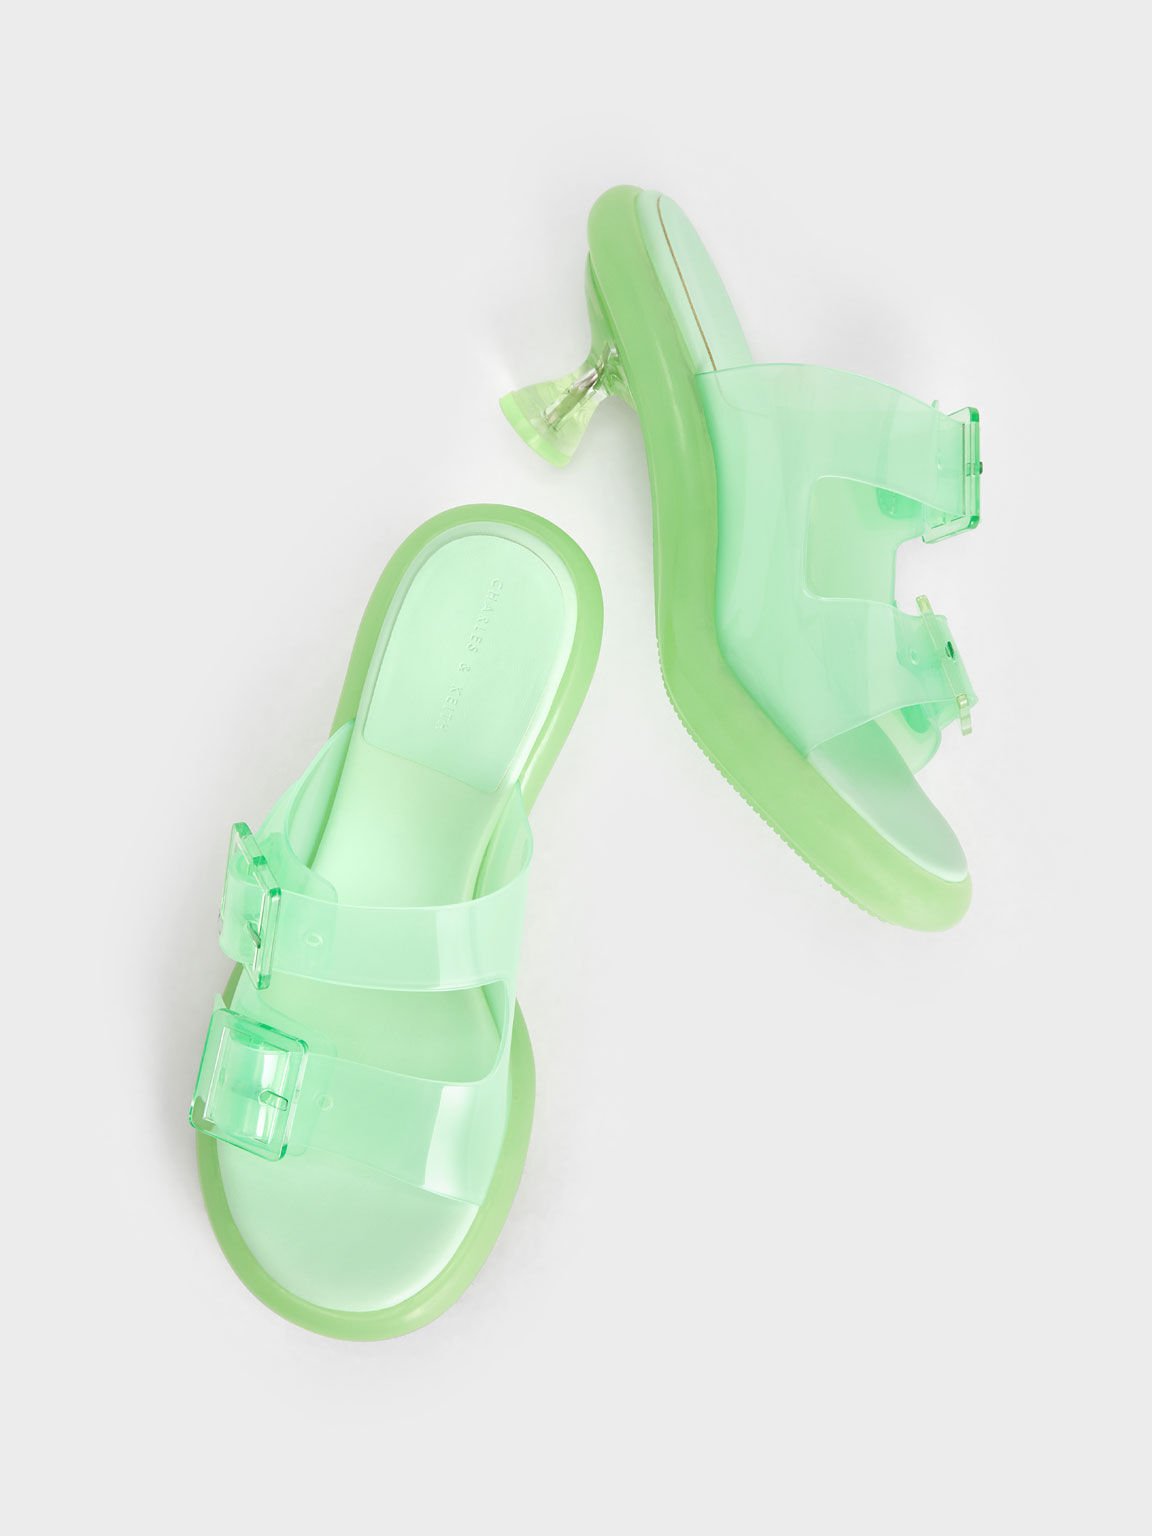 Madison Double Buckle See-Through Mules, Green, hi-res